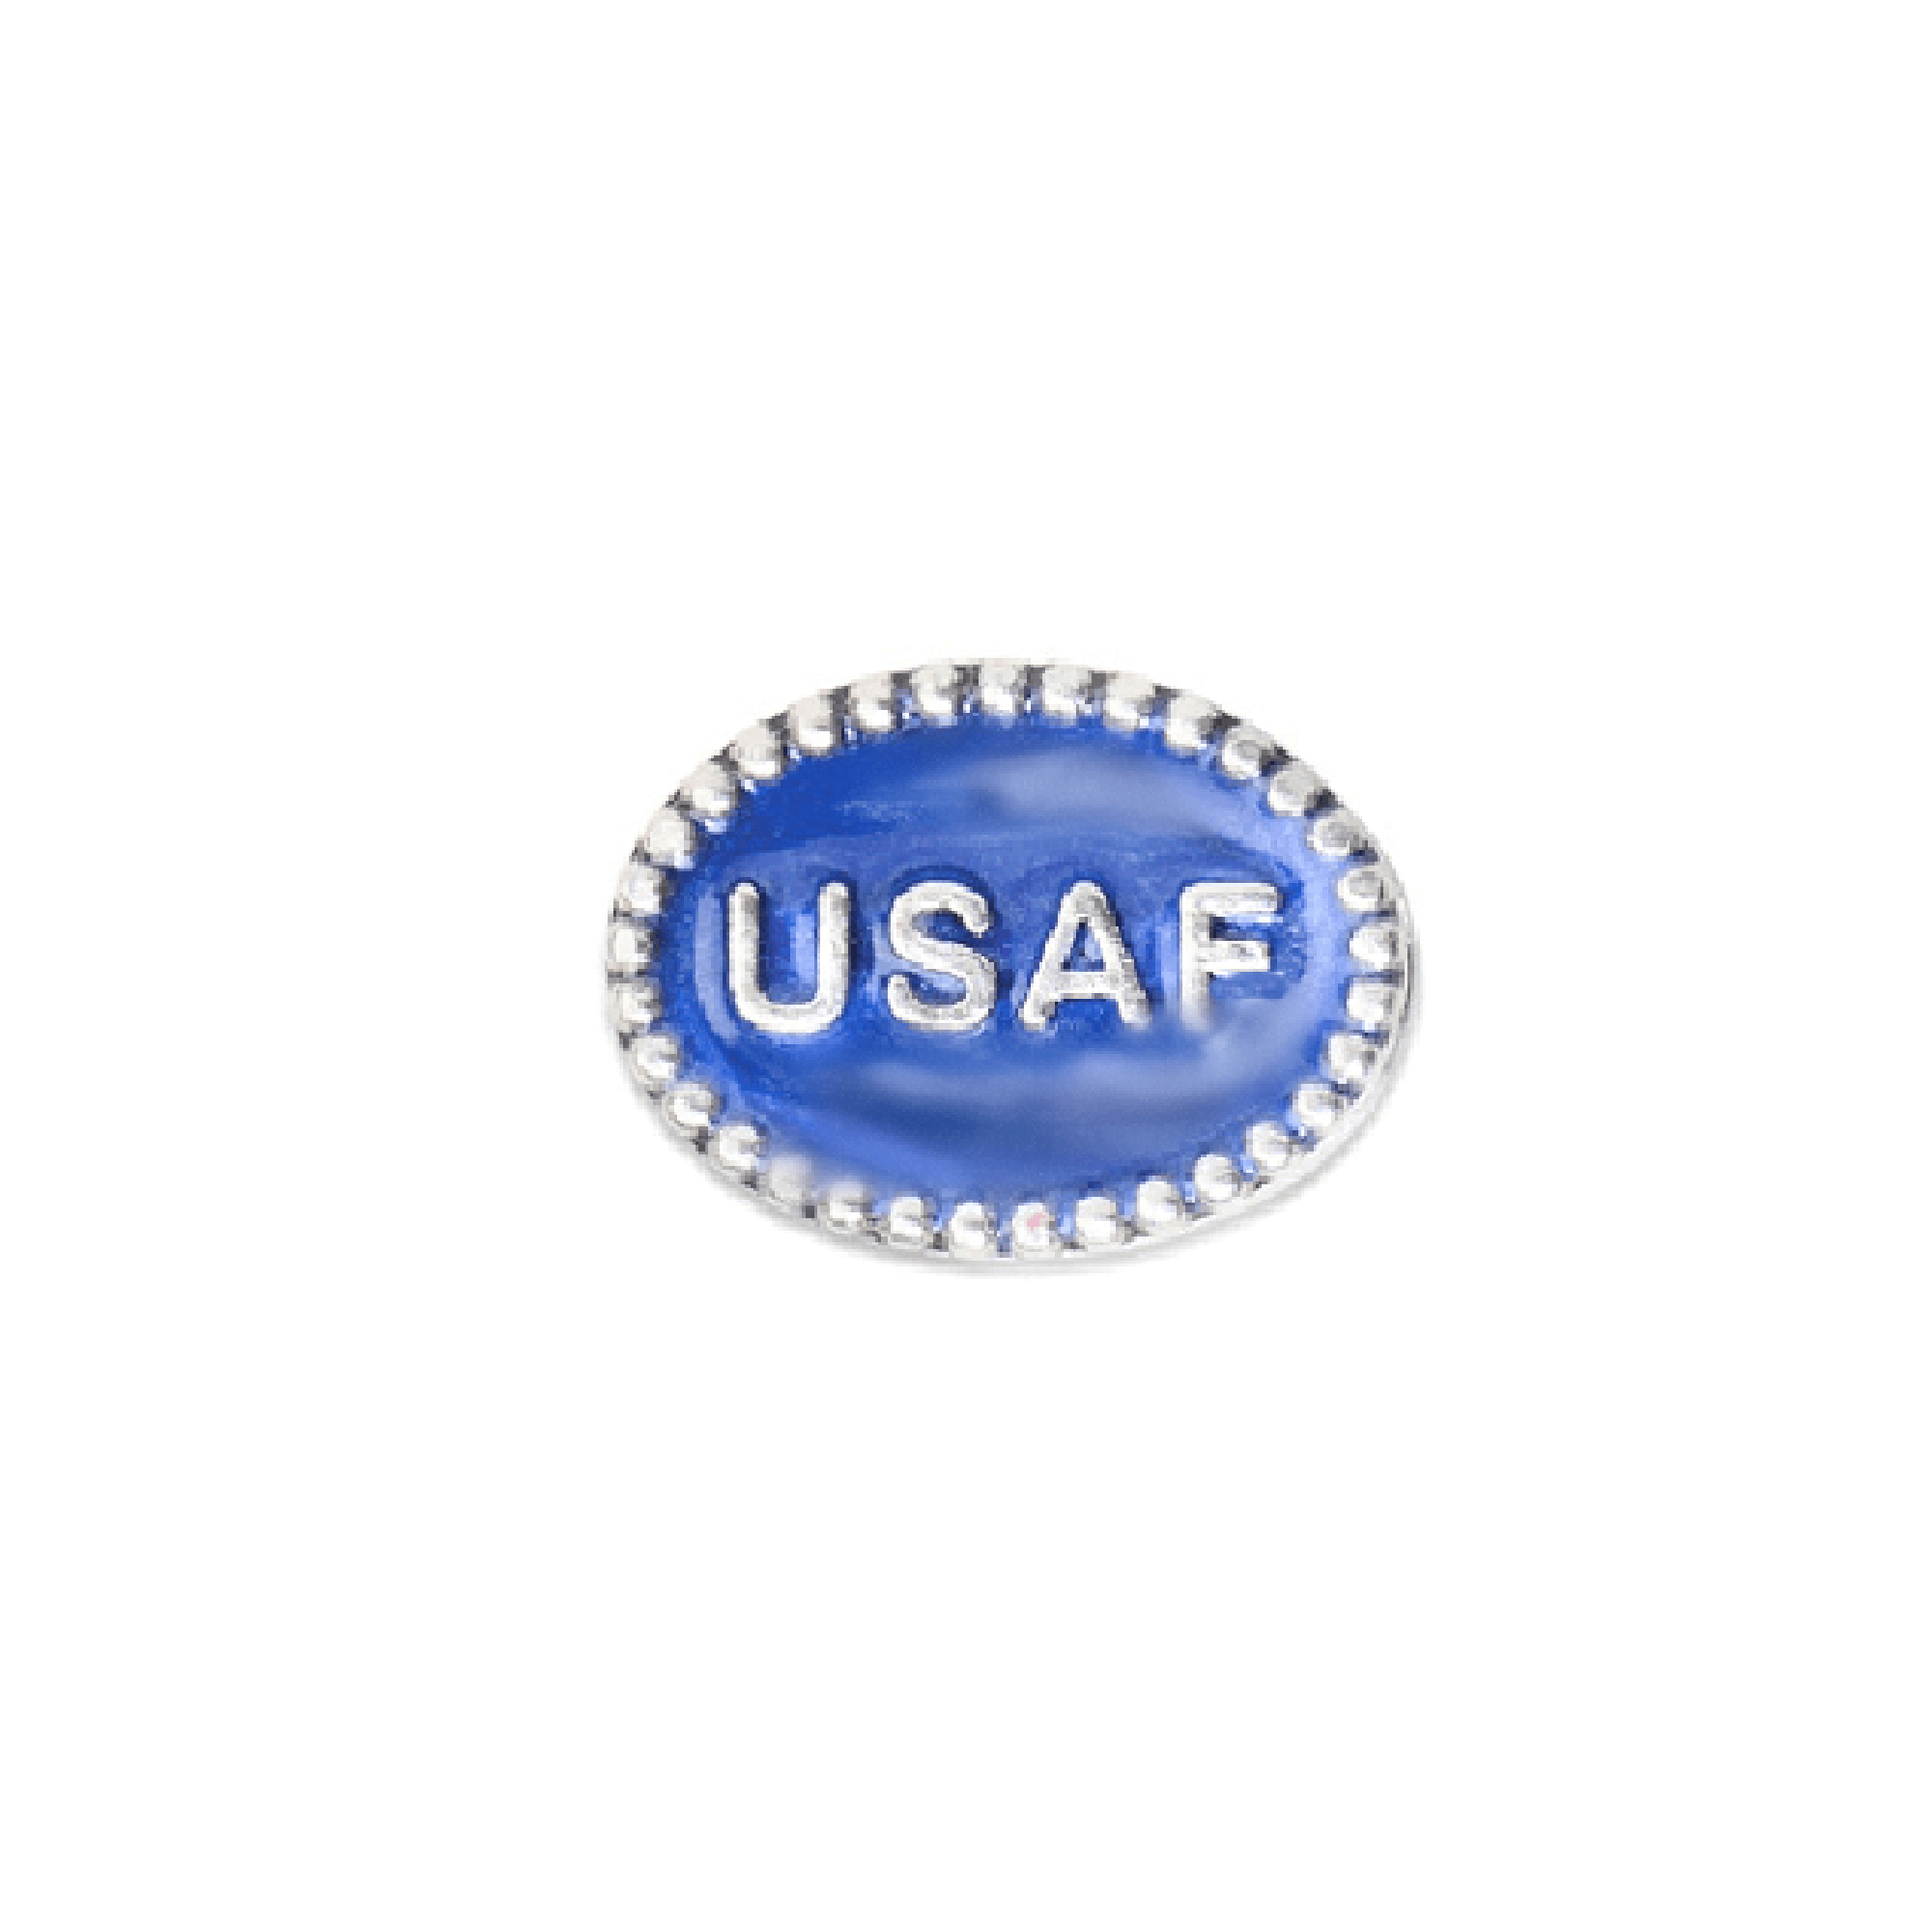 Military Jewelry, Military Charms, Military Gifts, USAF, United States Air Force